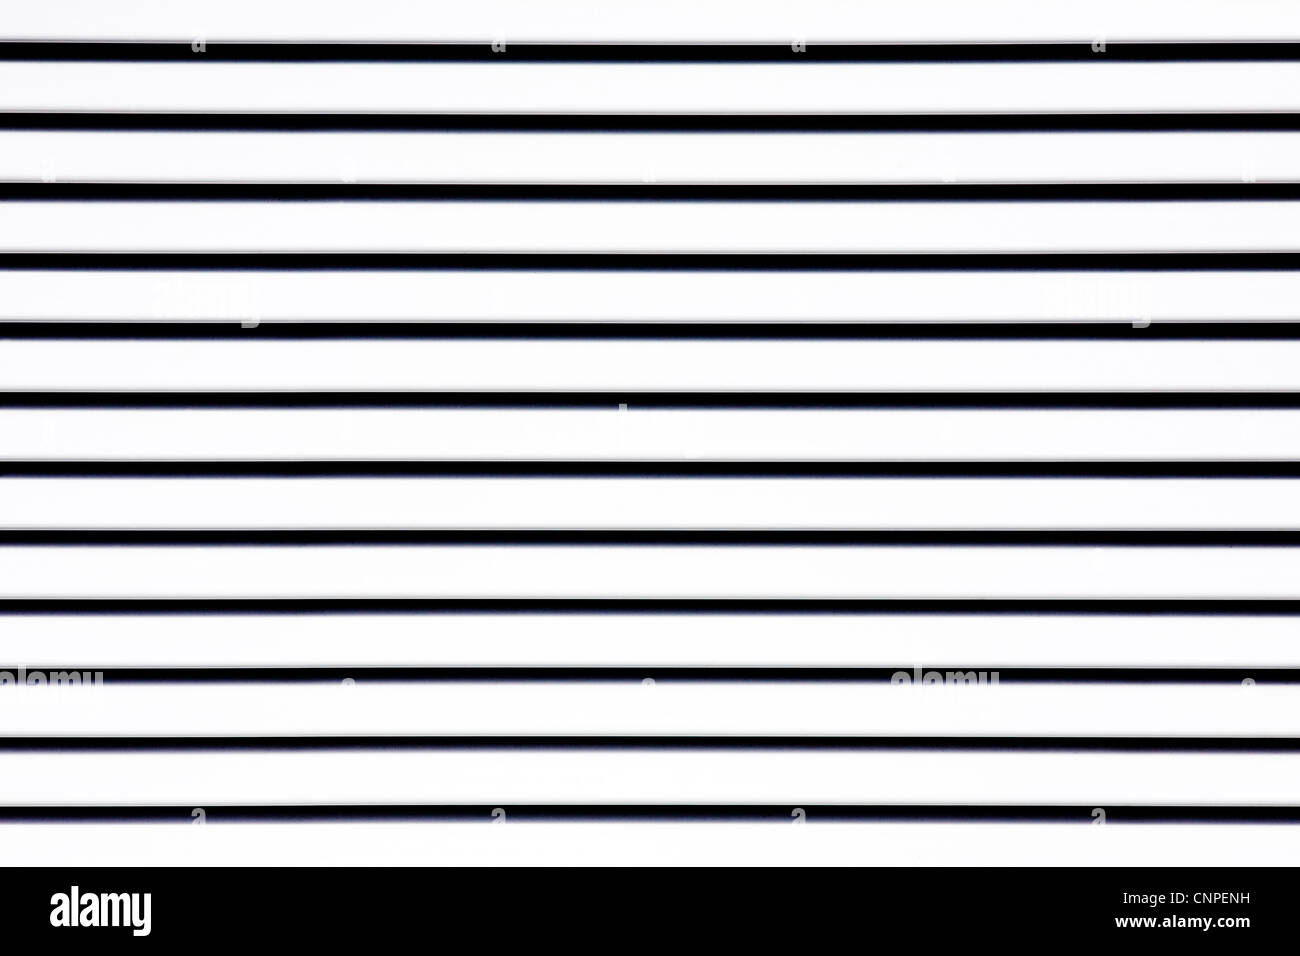 Black and white striped pattern. Stock Photo